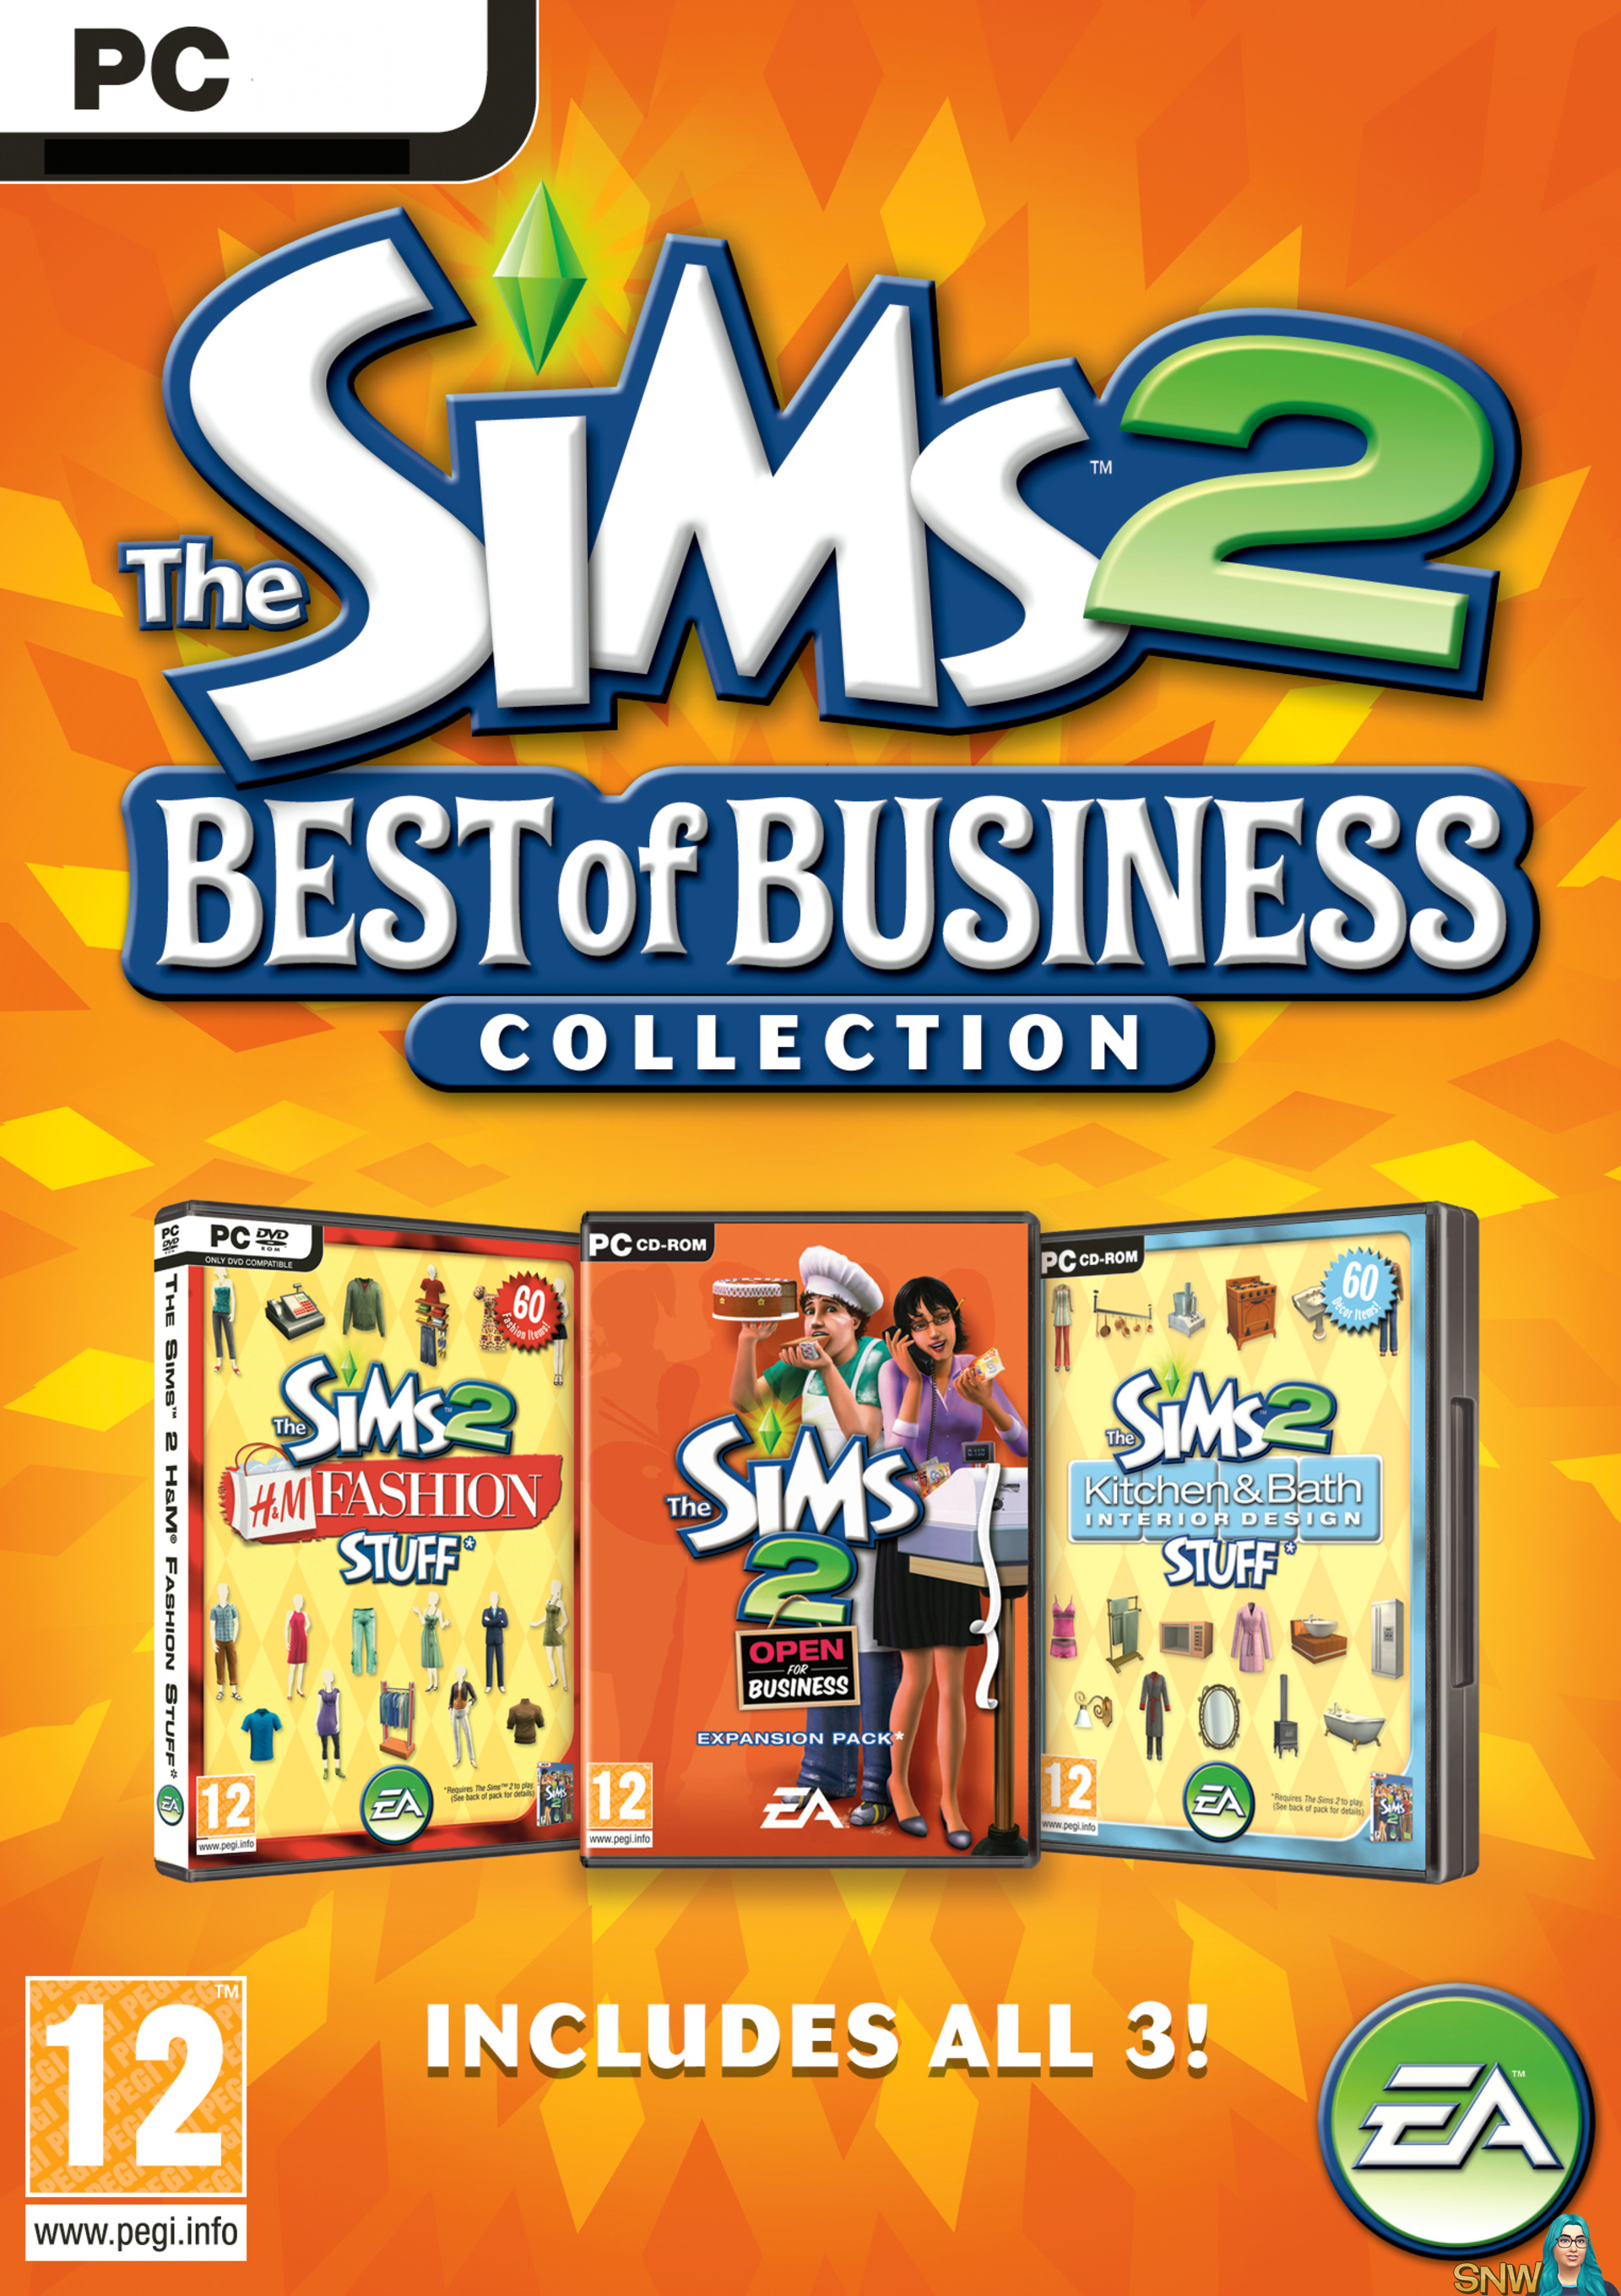 how many discs are in the sims 1 complete collection